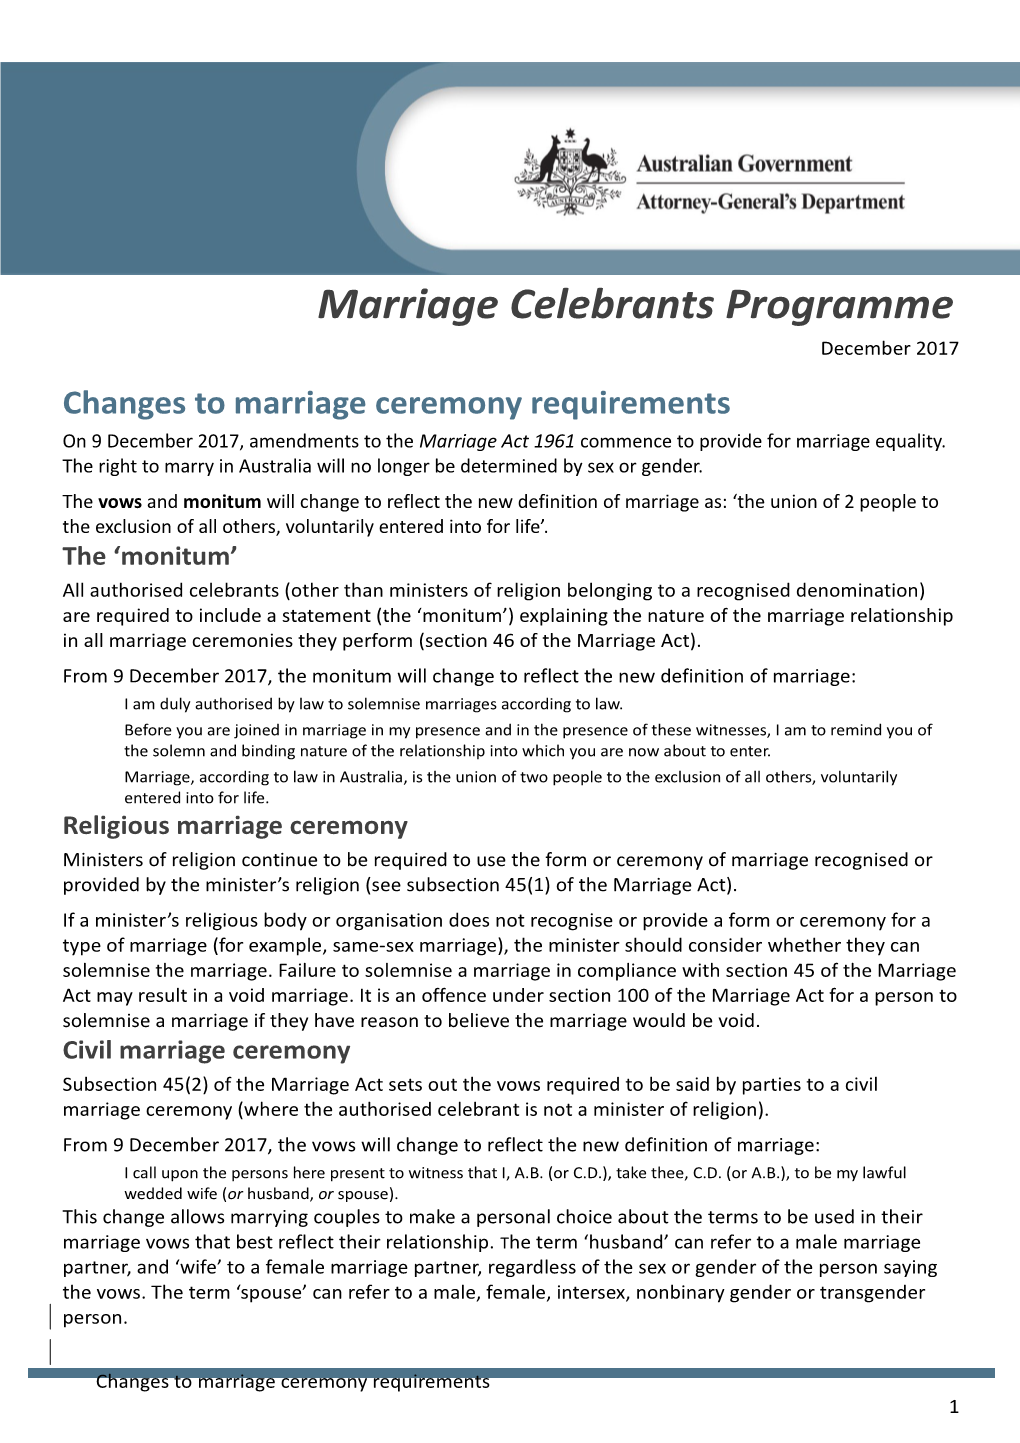 Fact Sheet Changes to Marriage Ceremony Requirements